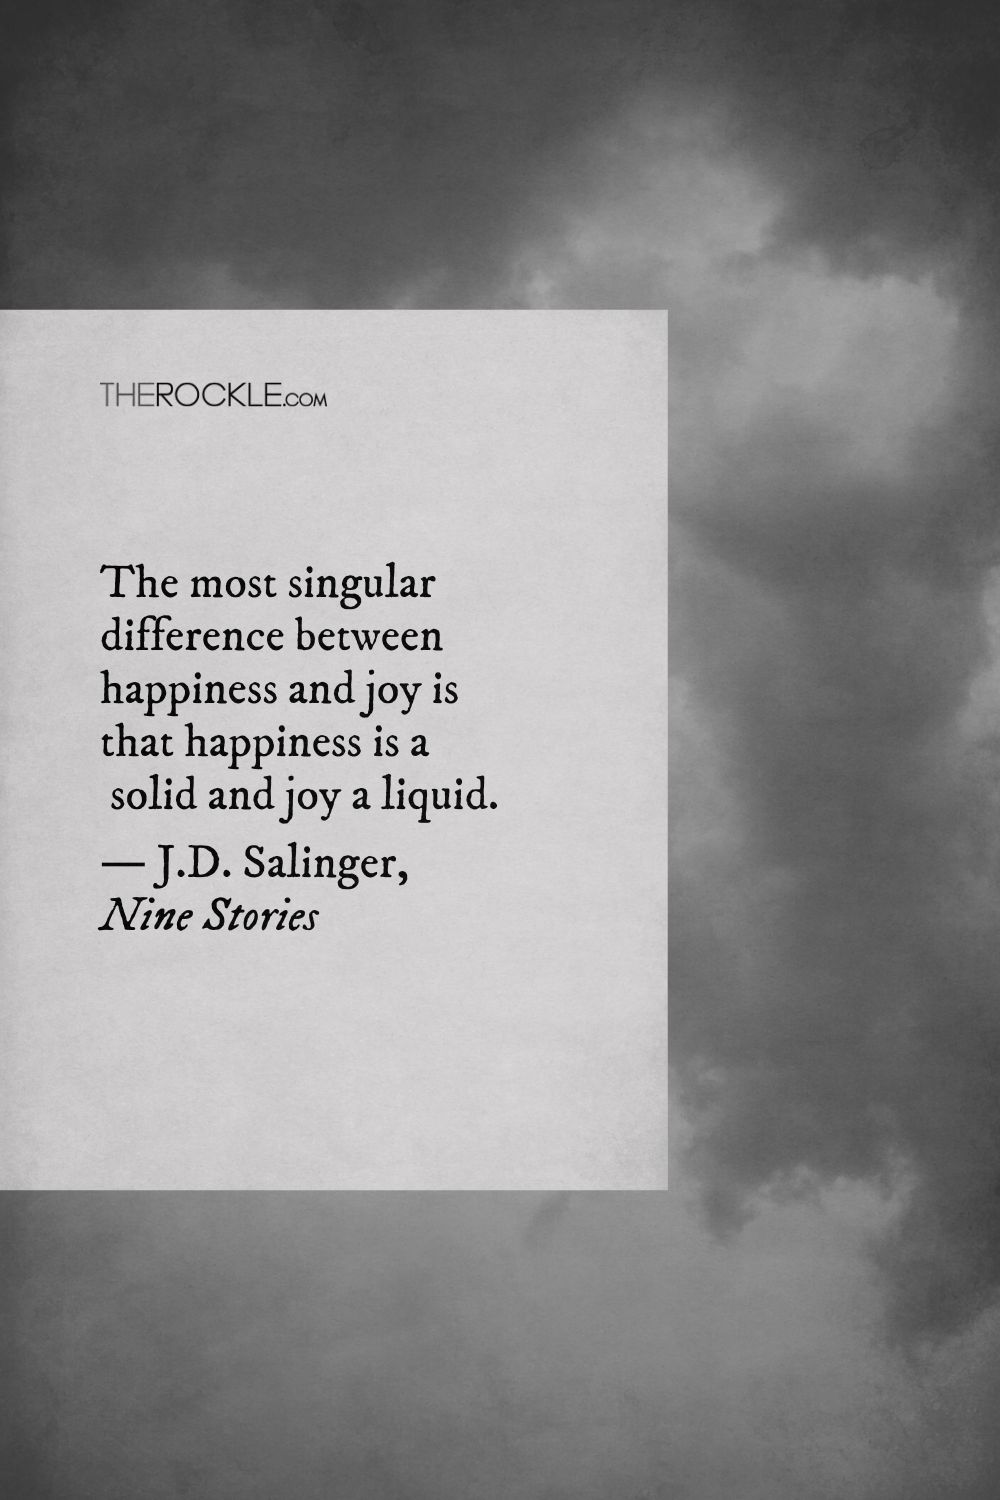 Salinger's quote on happiness and joy